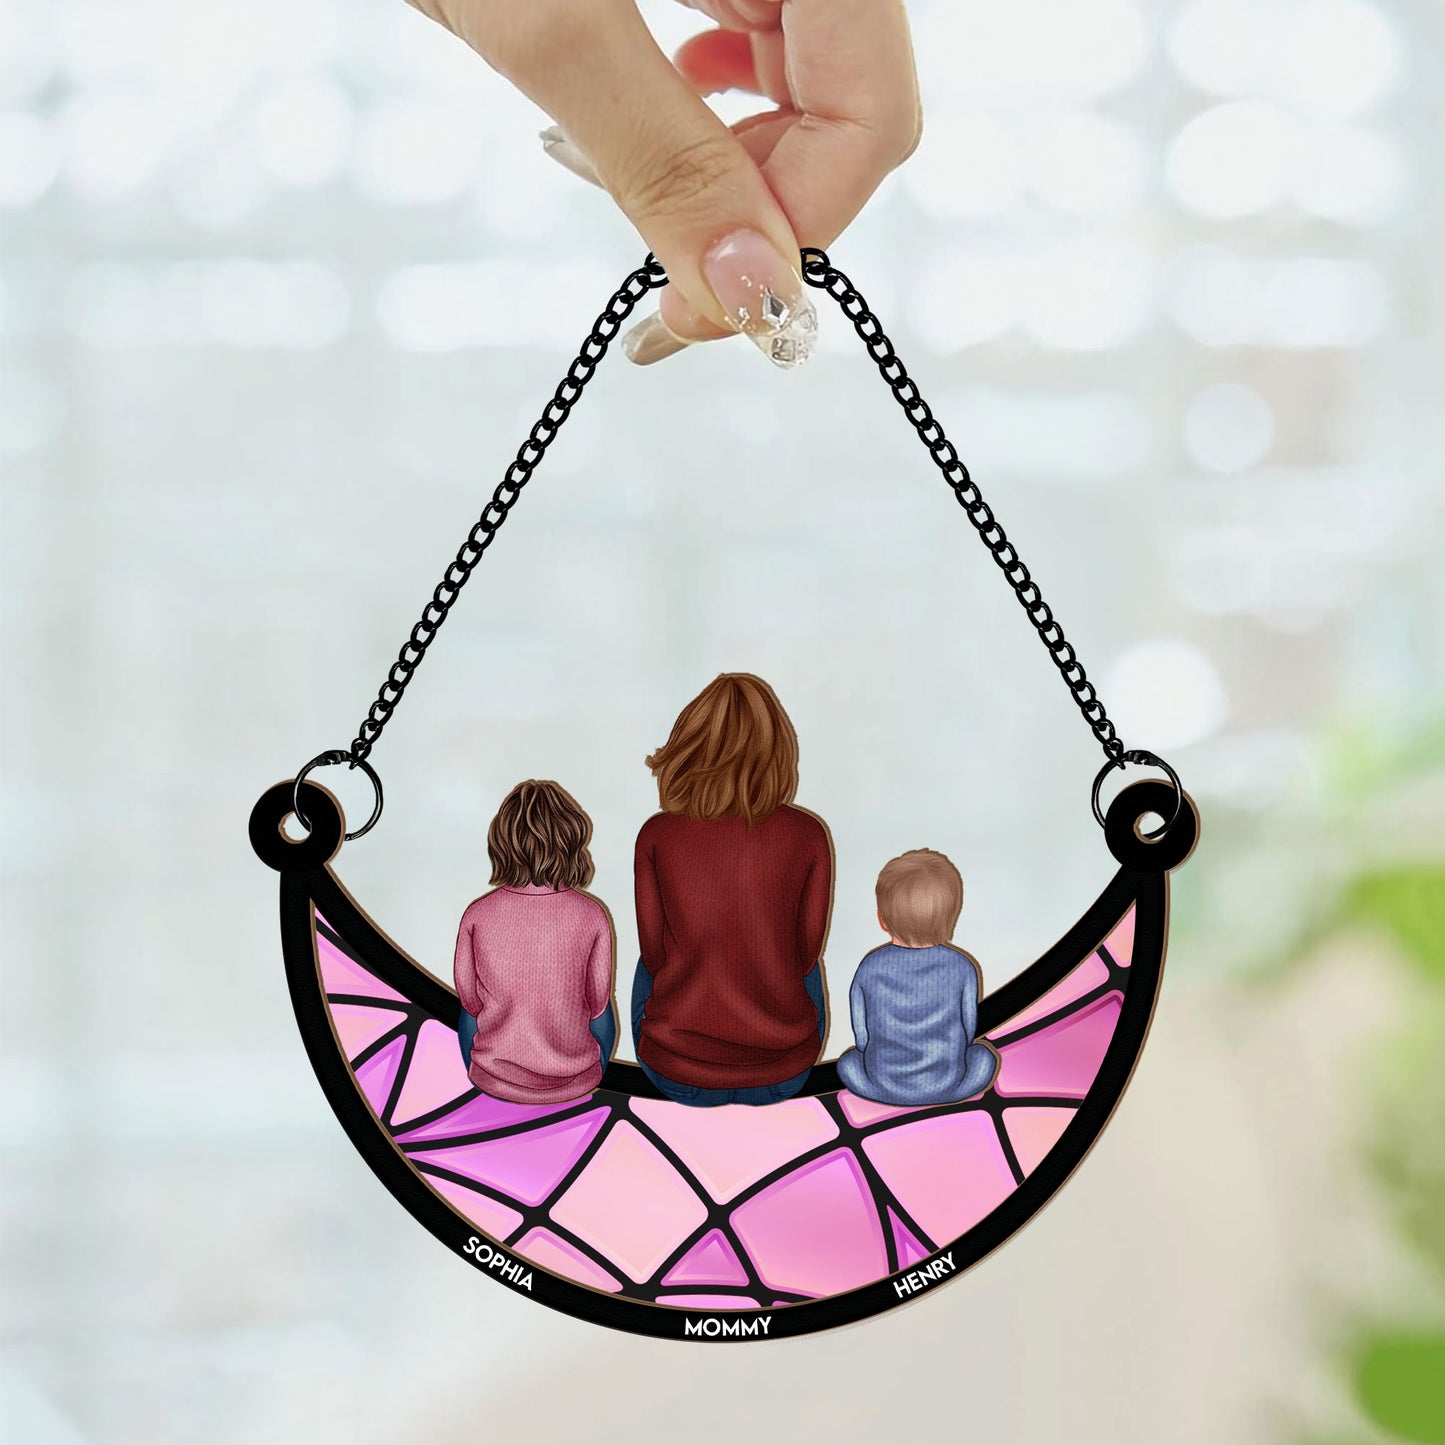 Mom And Her Kids On The Moon - Personalized Window Hanging Suncatcher Ornament